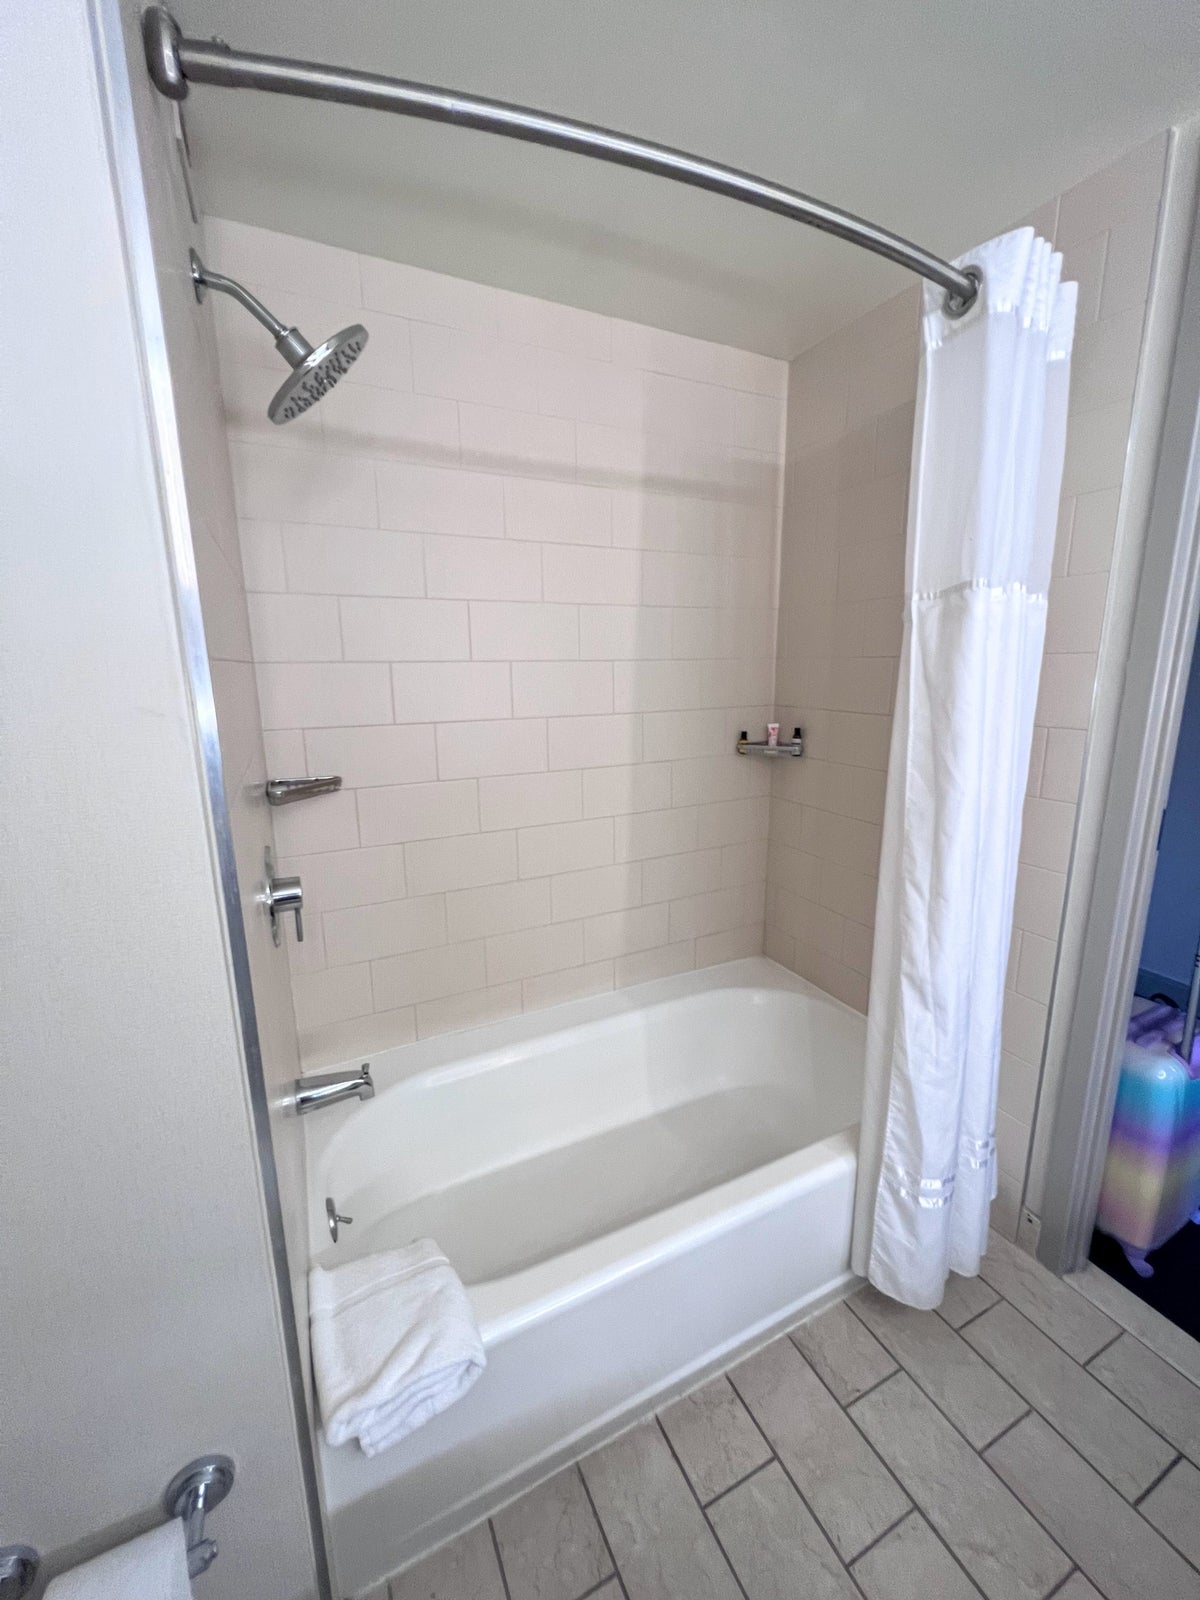 Shower in 1 king and 1 double bed room at Hyatt Centric Fisherman's Wharf San Francisco